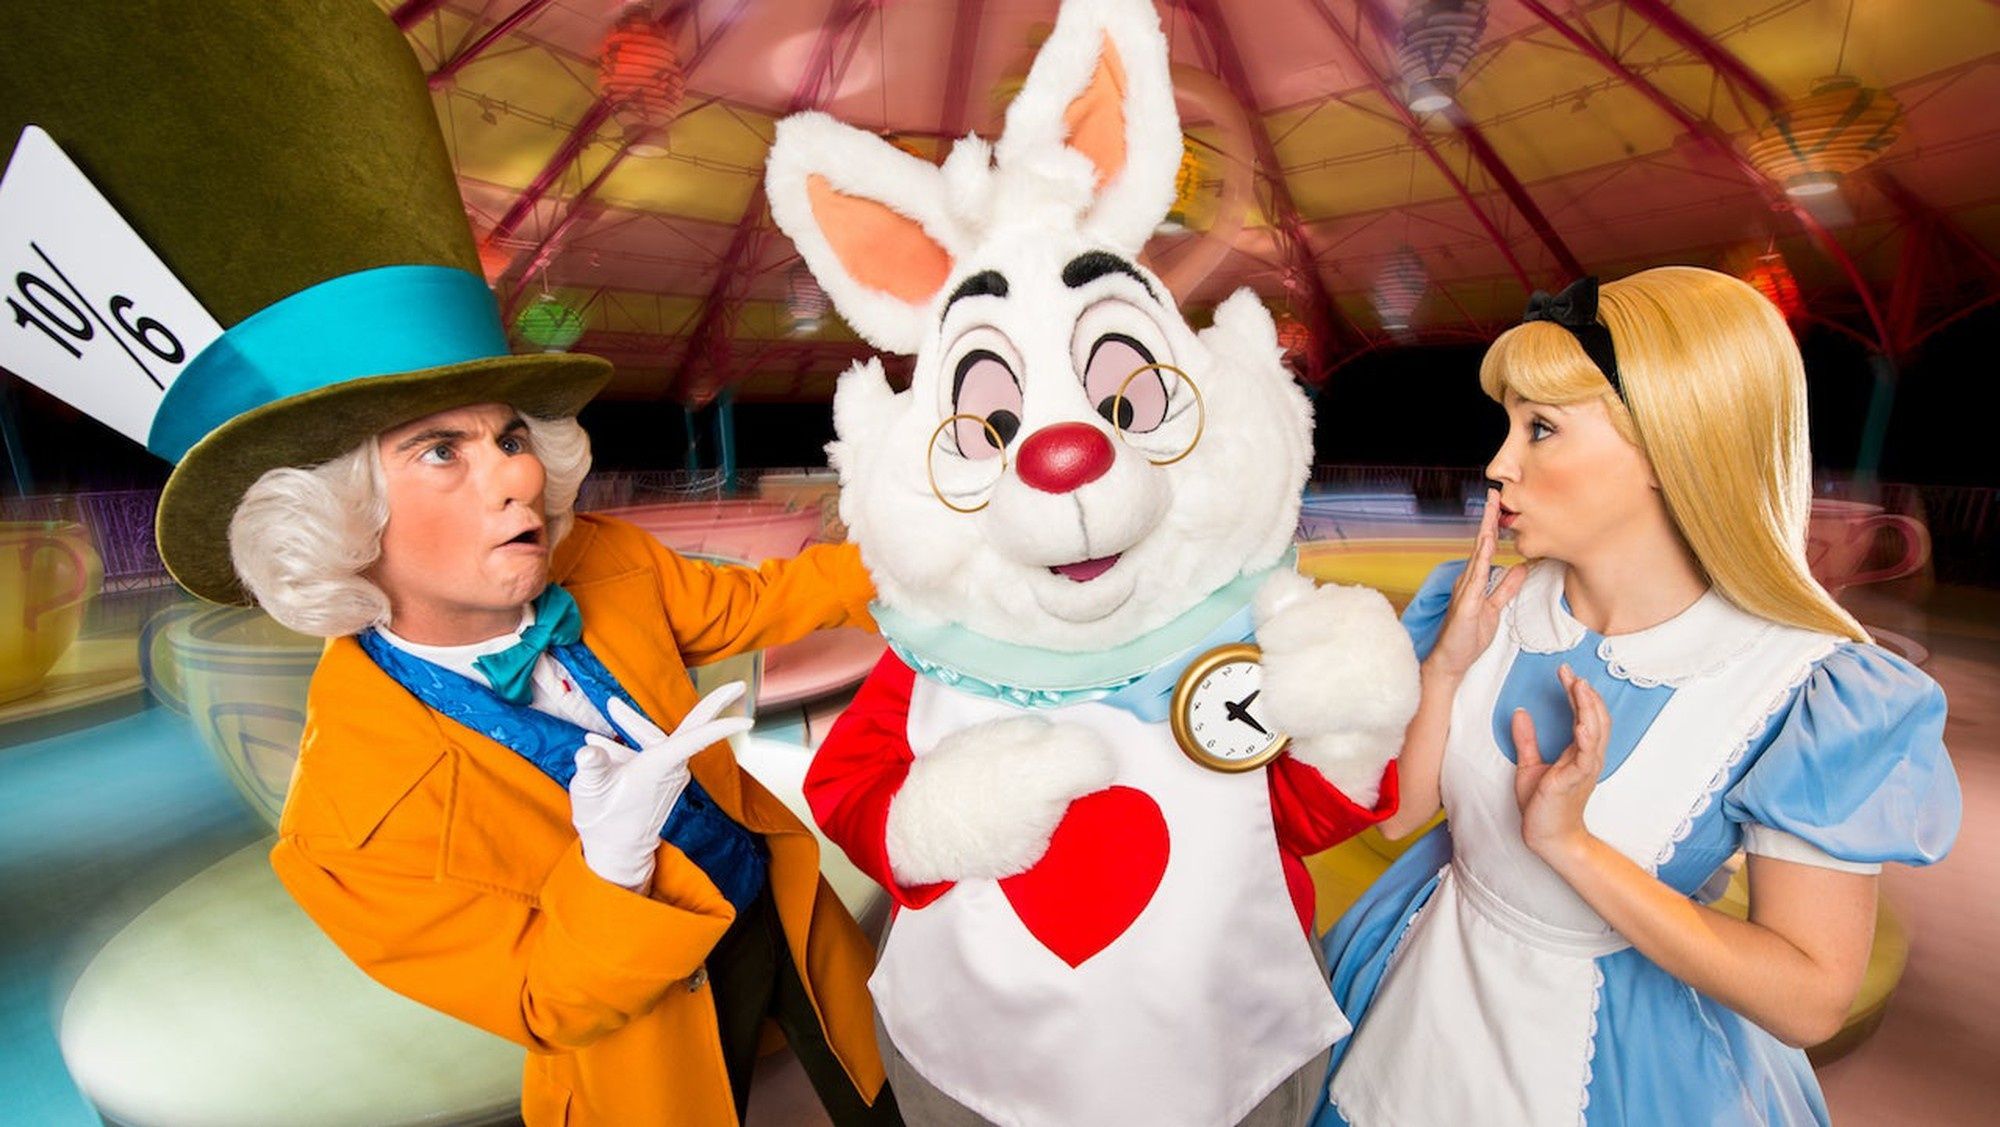 Alice, Rabbit, and Mad Hatter look puzzled in front of their spinning teacup ride at Disney World.